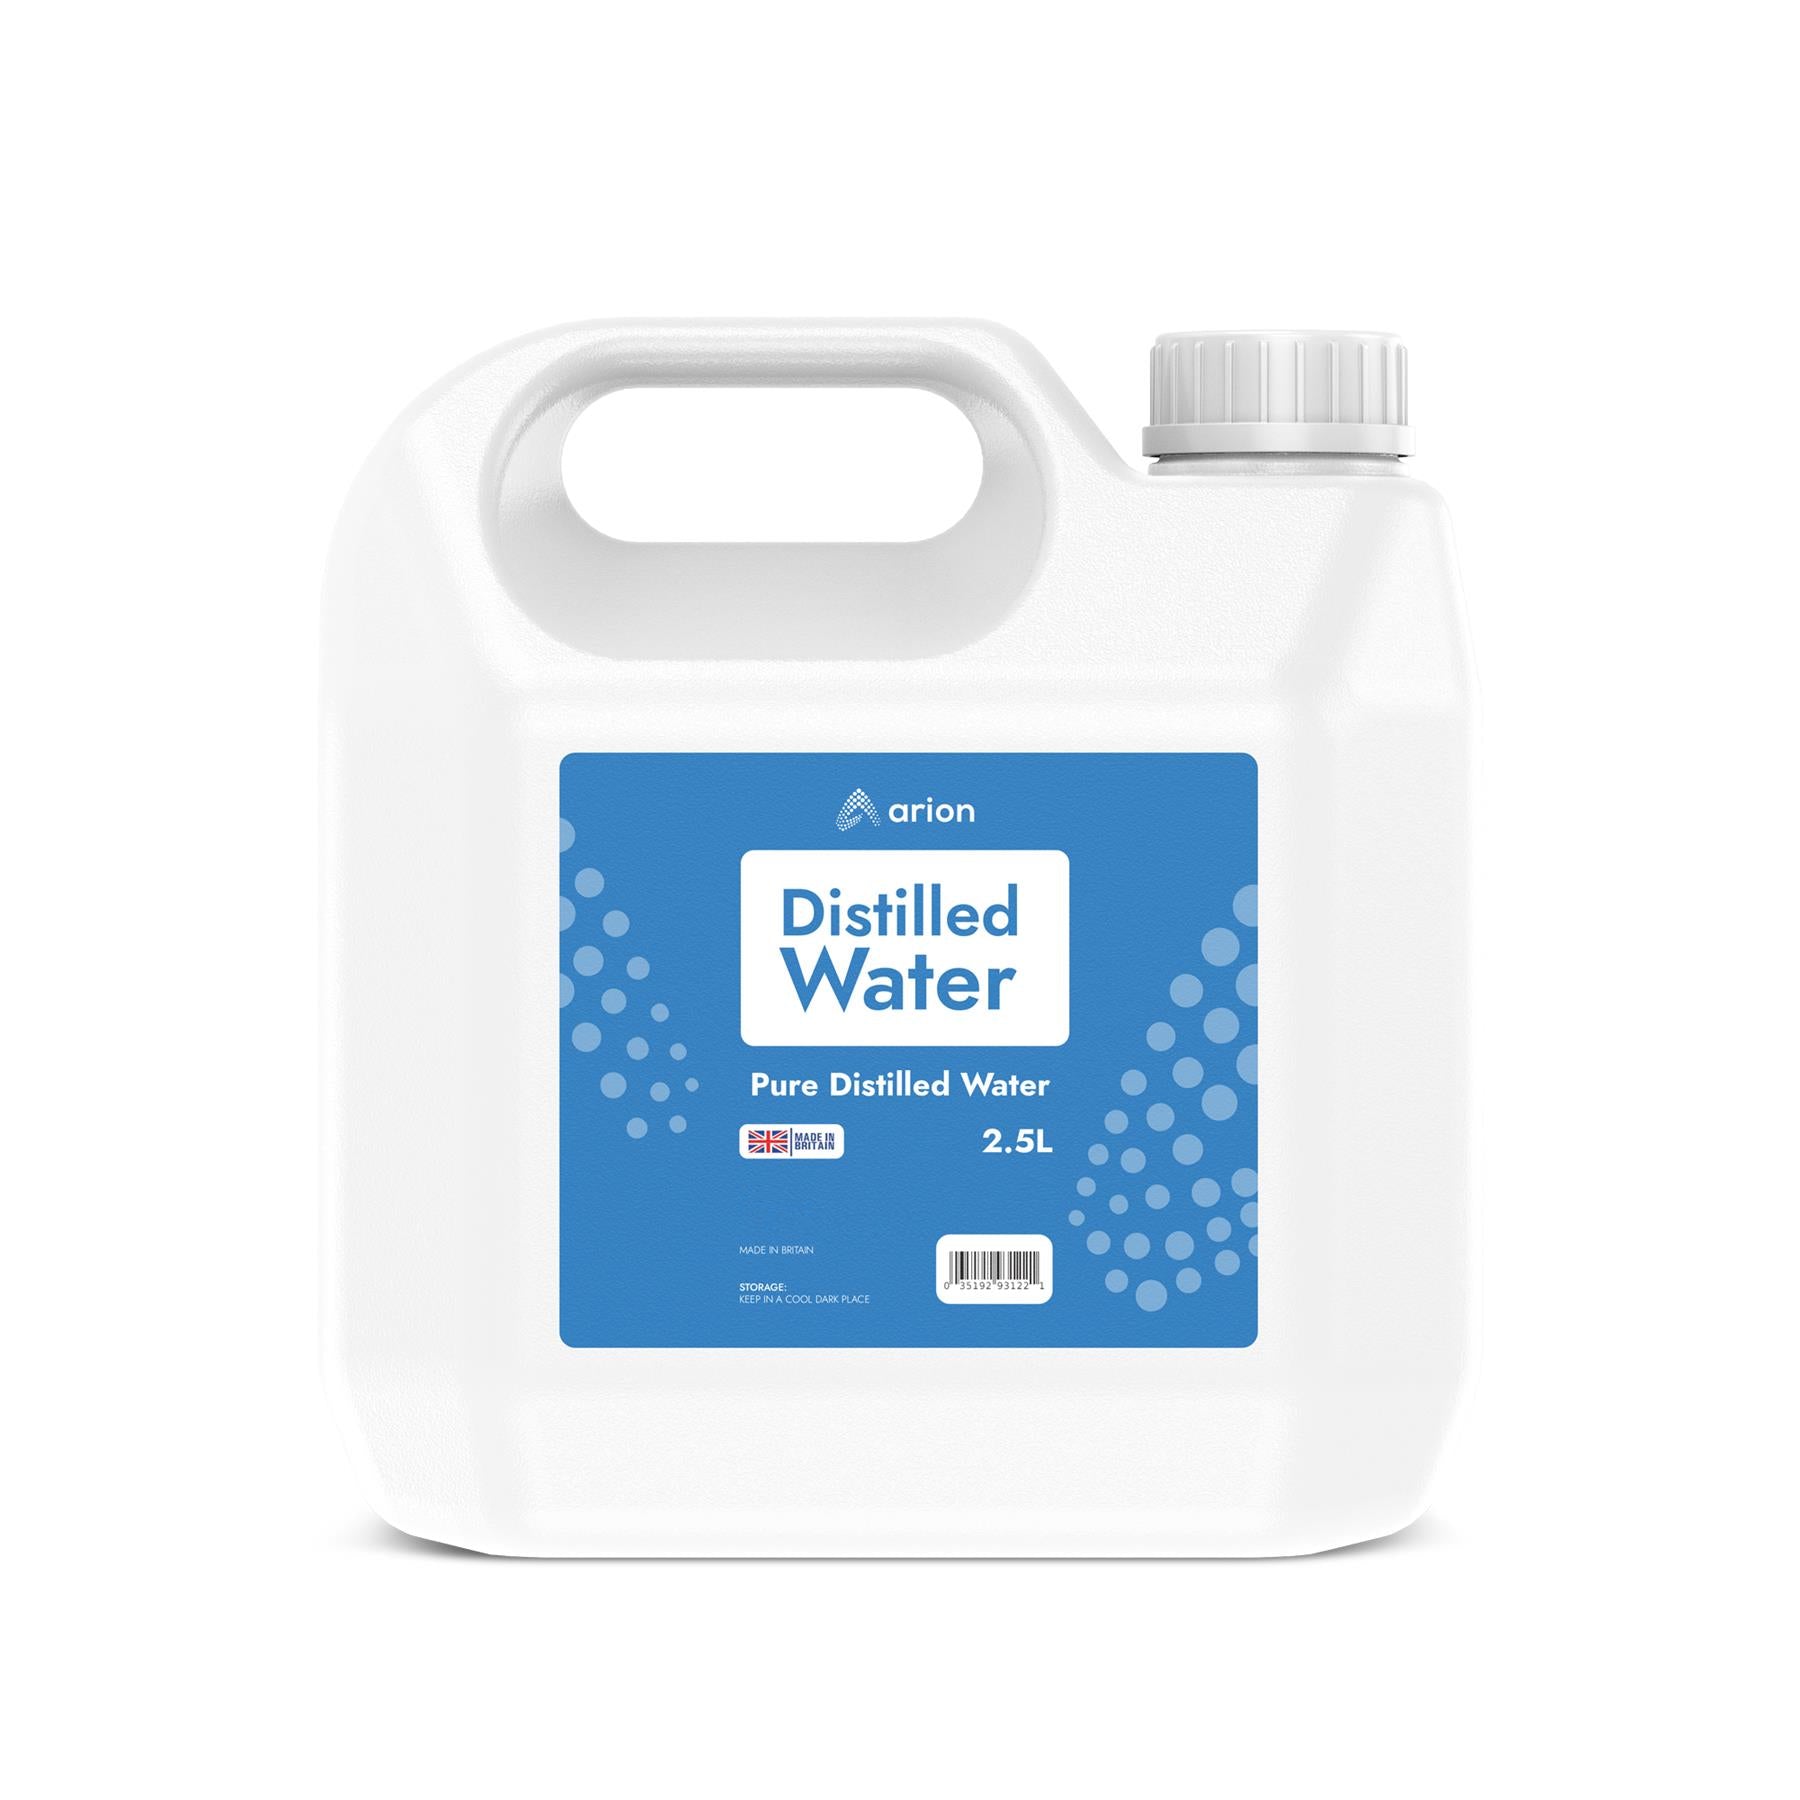 Arion Distilled Water - Just Horse Riders